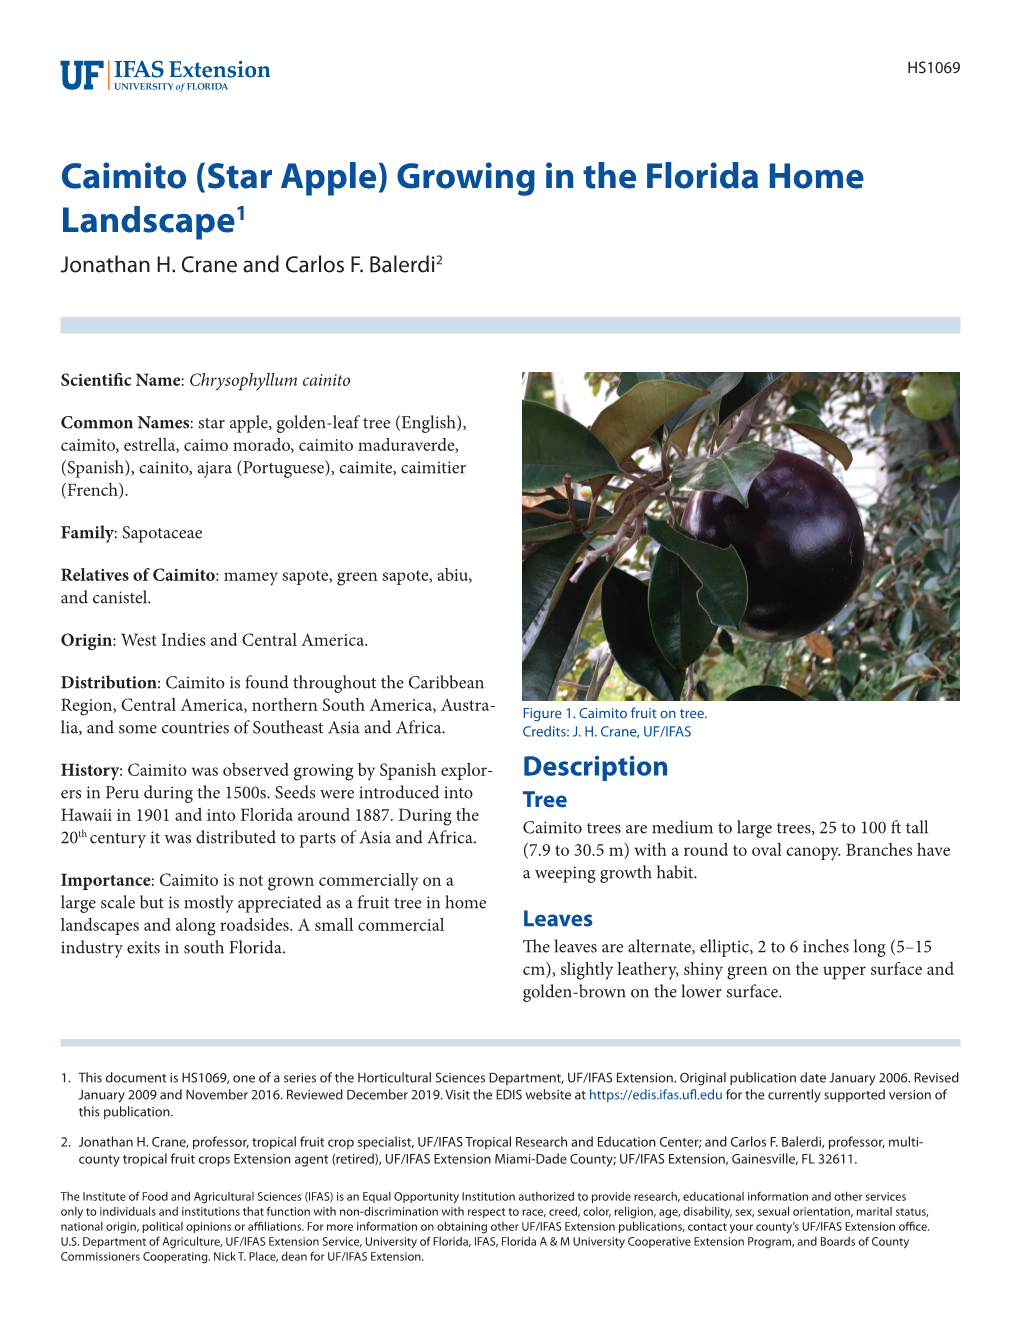 Caimito (Star Apple) Growing in the Florida Home Landscape1 Jonathan H